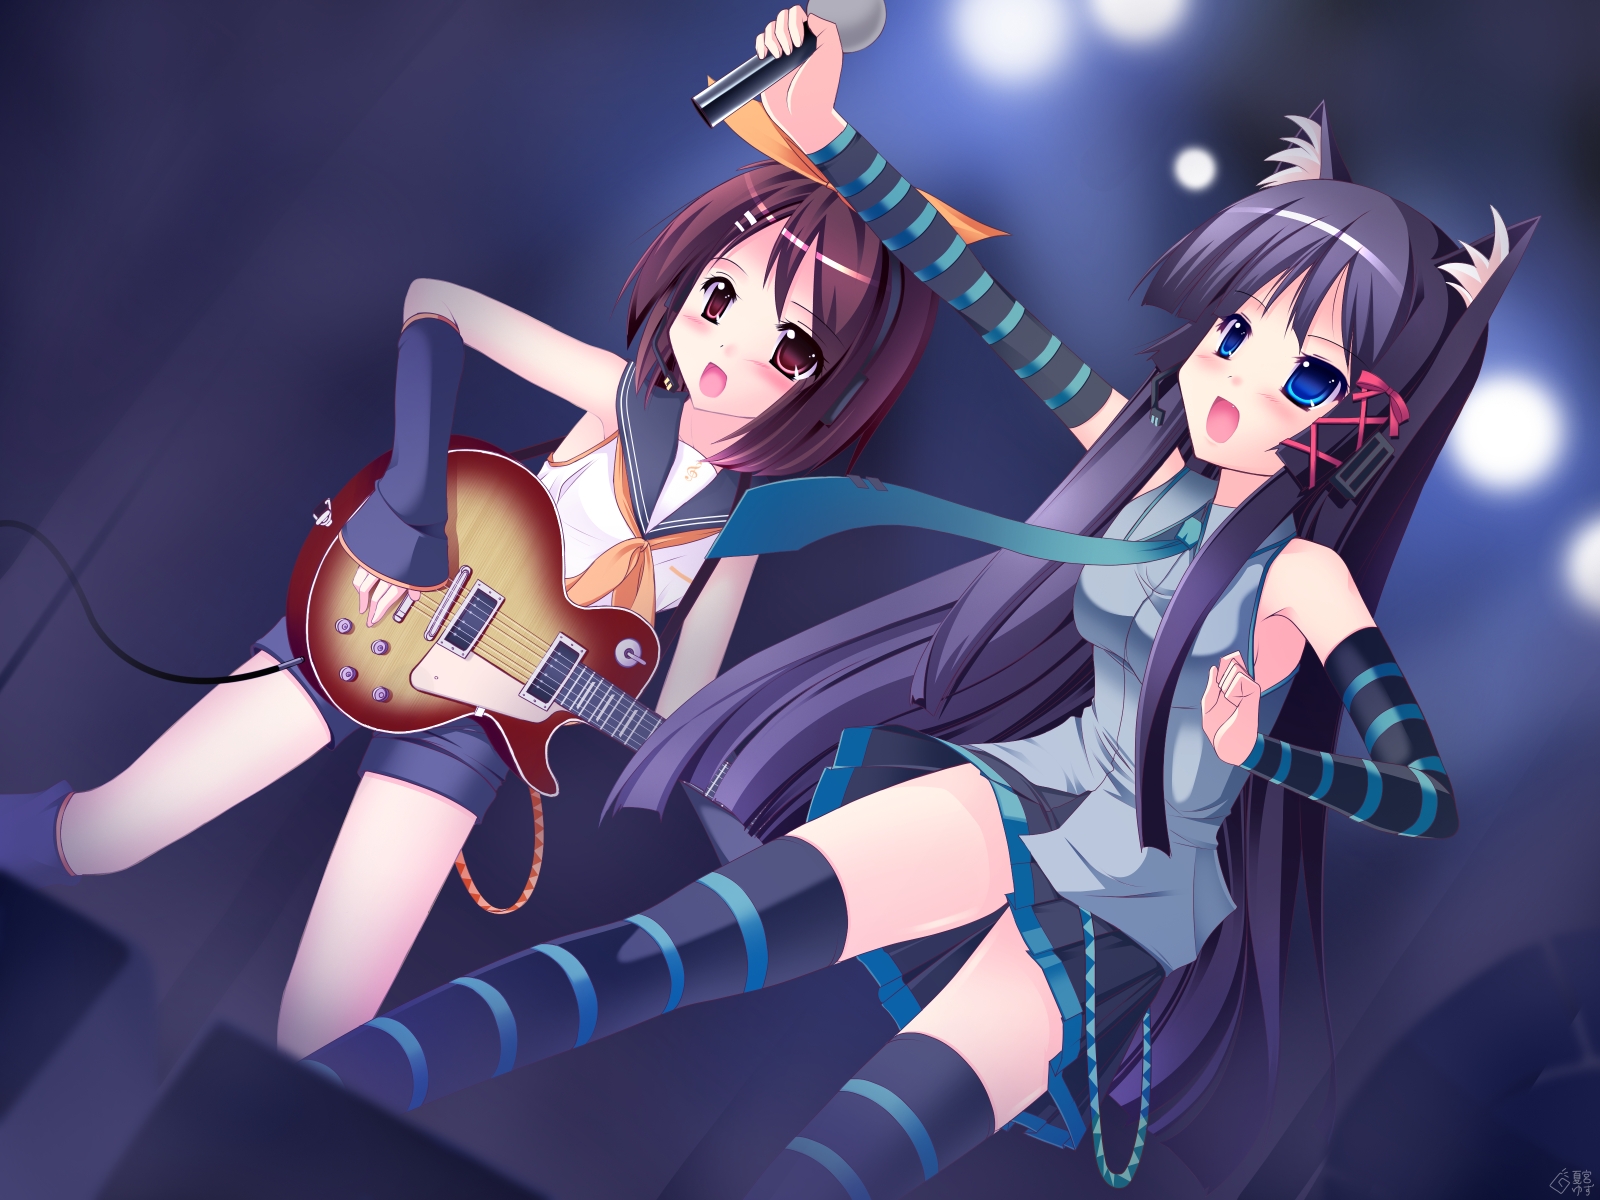 Anime-inspired cosplay featuring Mio Akiyama and Yui Hirasawa from K-ON! rock out with guitars in a vibrant crossover wallpaper.